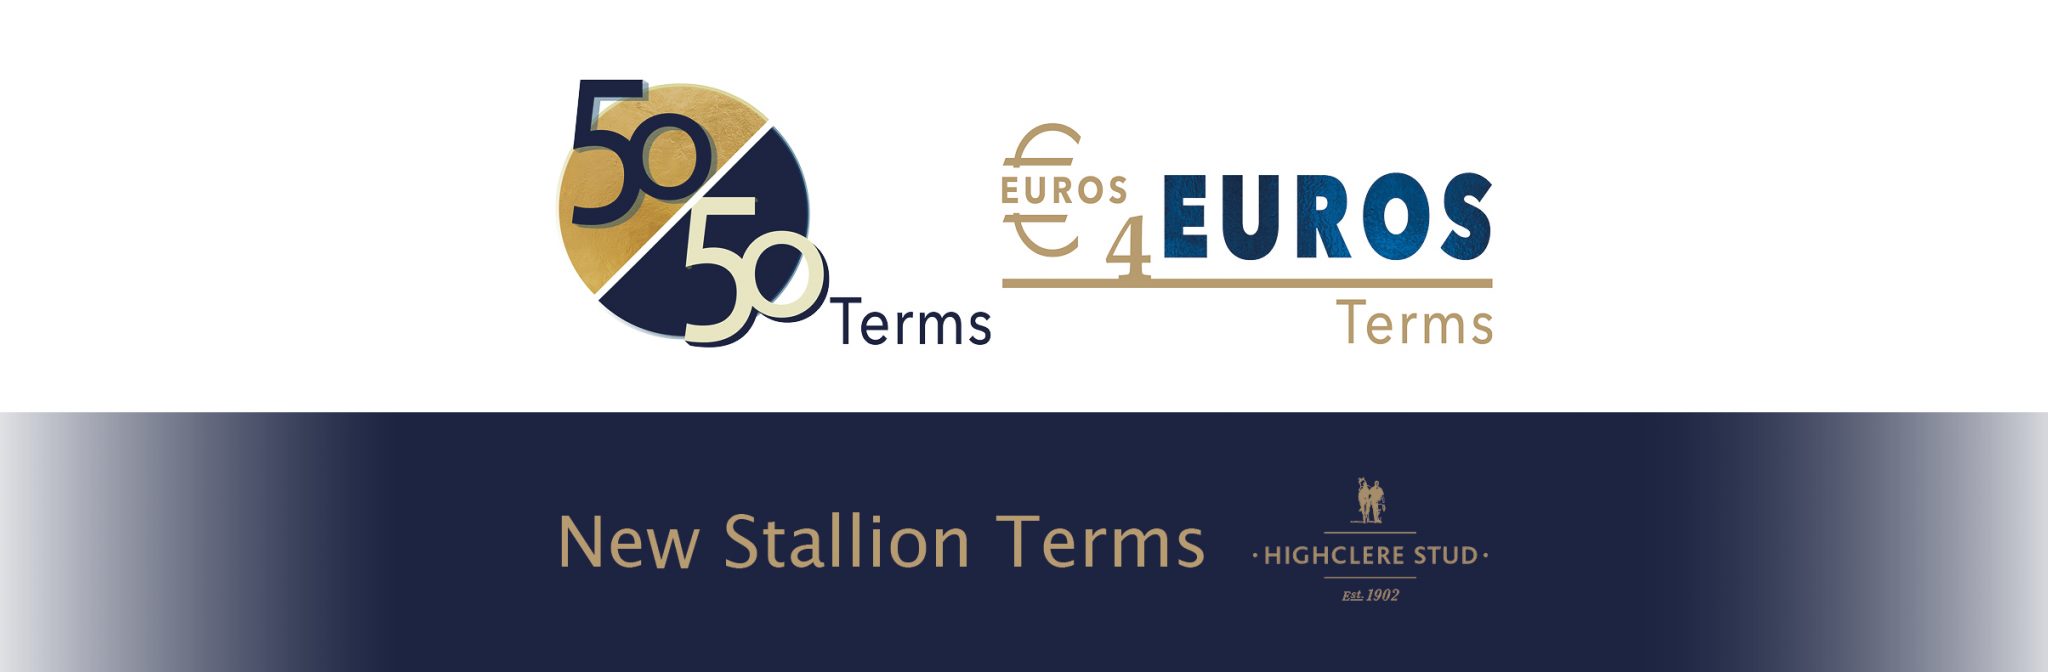 Highclere Stud Launch 50/50 and Euros4Euros Nomination Terms